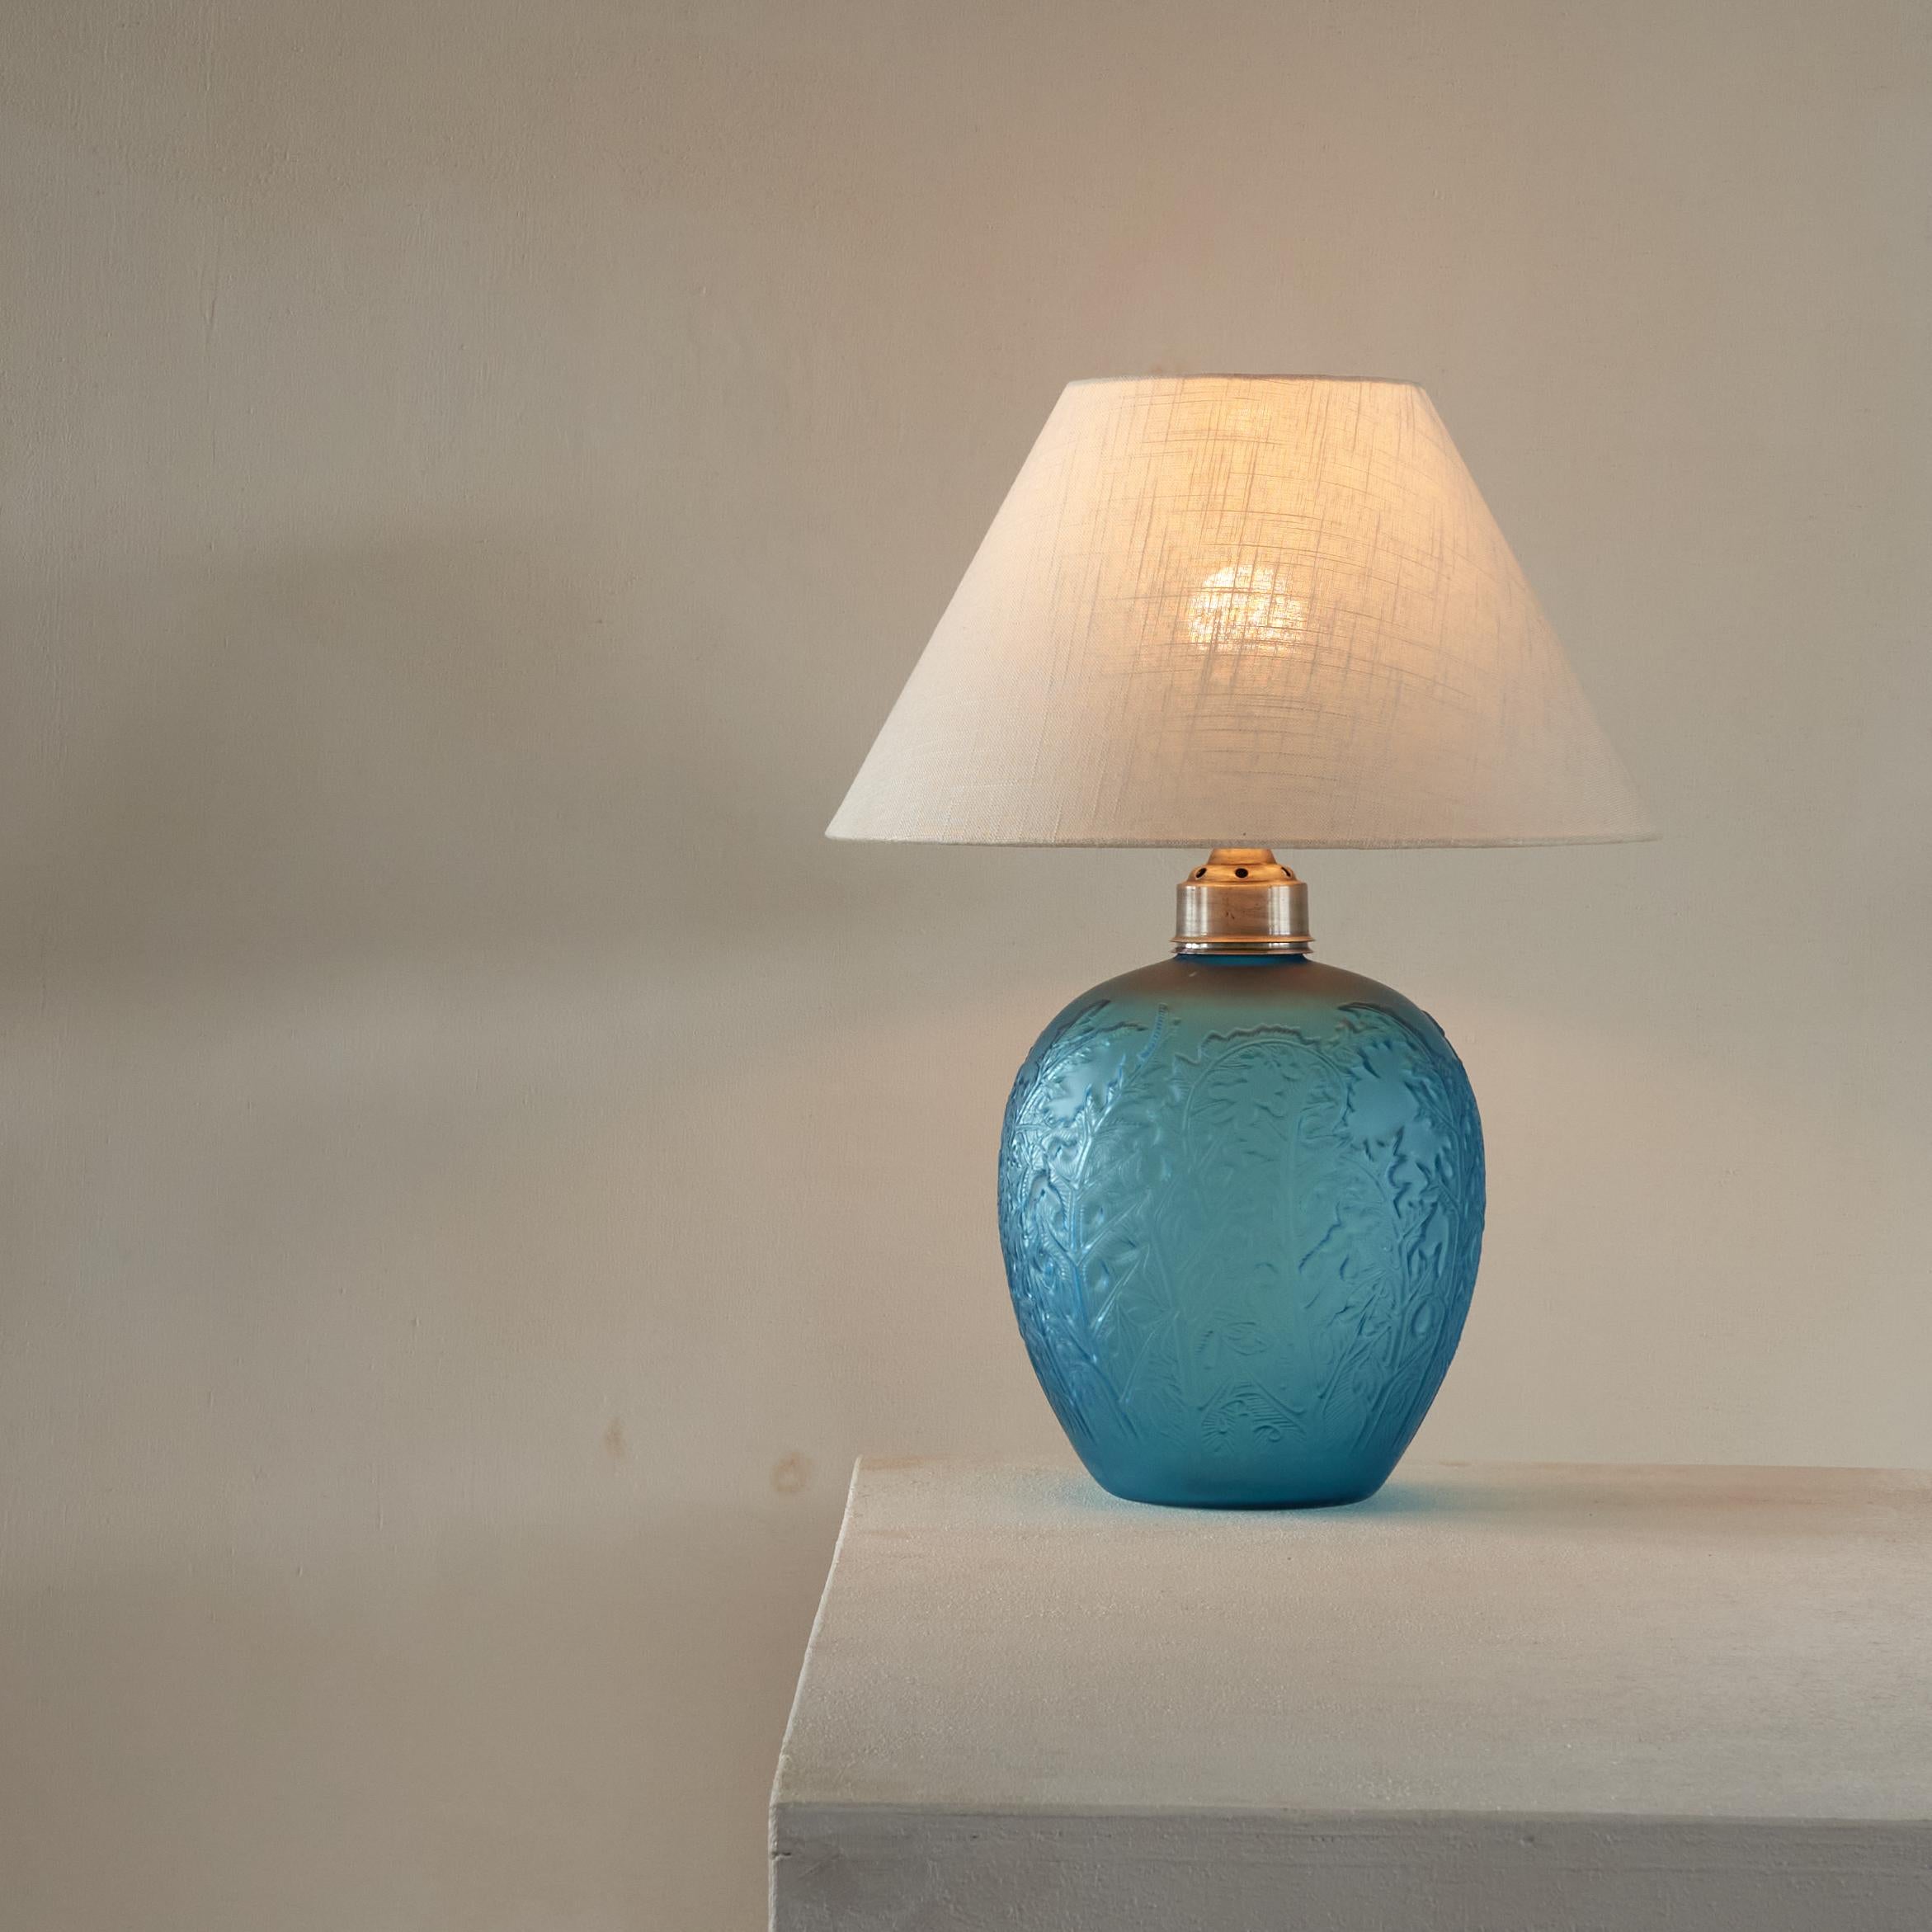 Hand-Crafted 'Acanthes' Table Lamp after René Lalique by Consolidated Glass Company 1930s For Sale